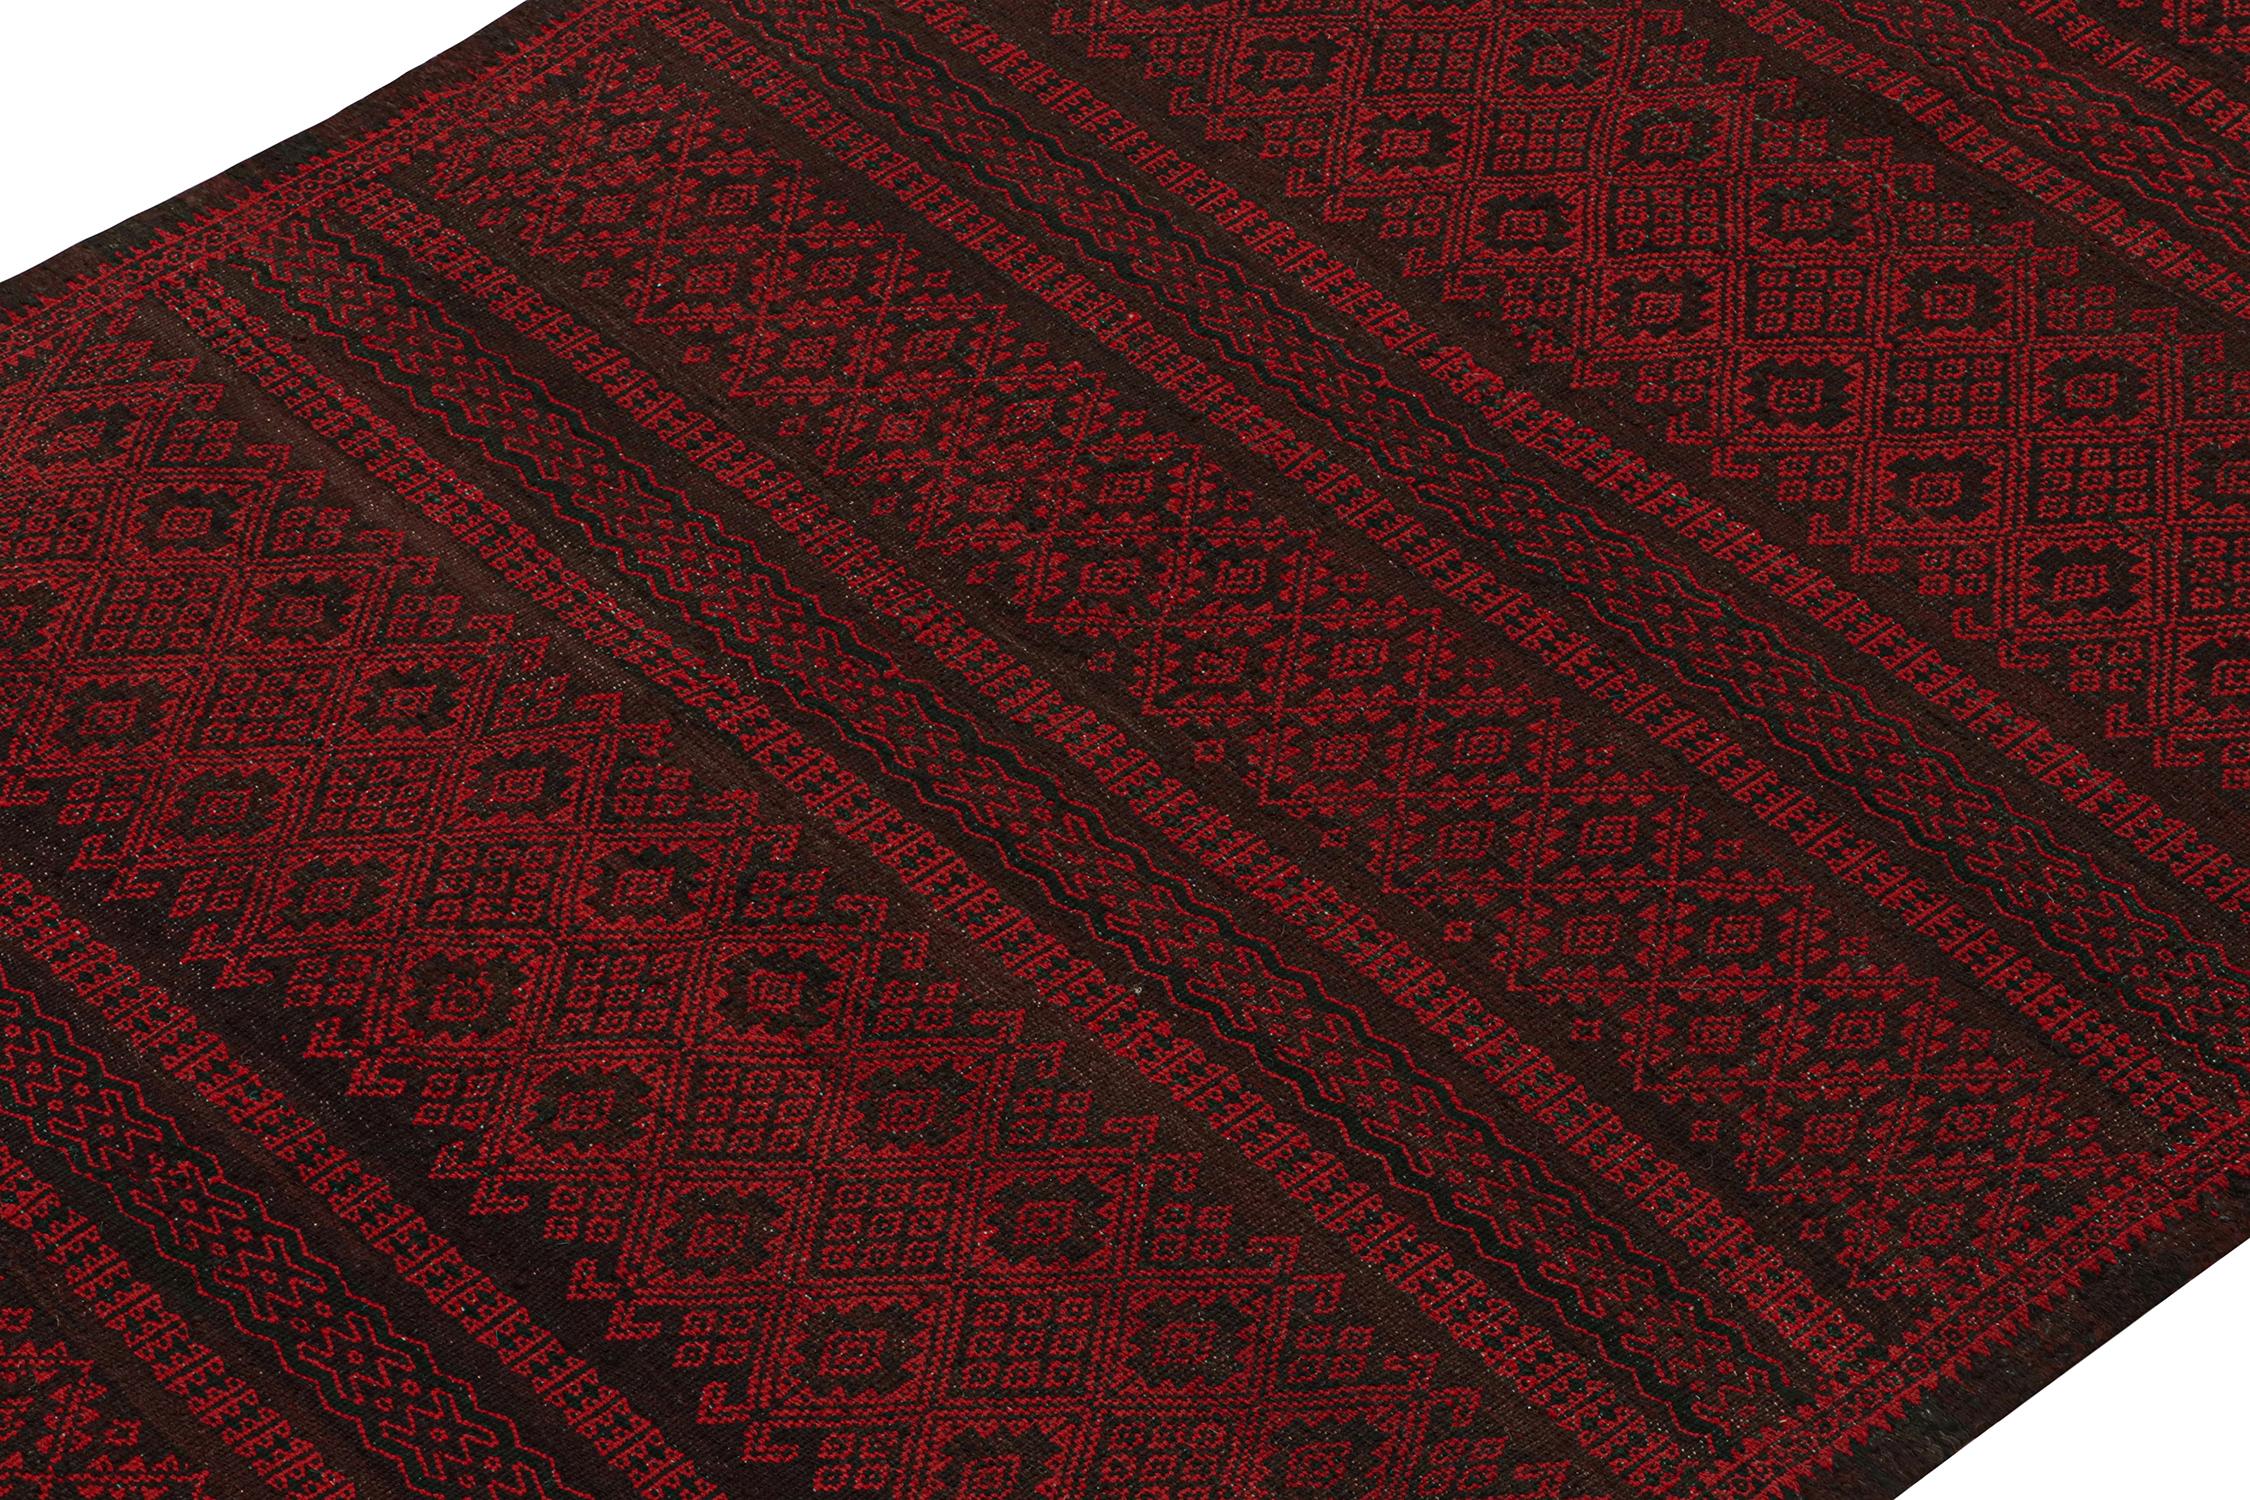 Turkish Vintage Persian Kilim in Red and Black Geometric Patterns by Rug & Kilim For Sale